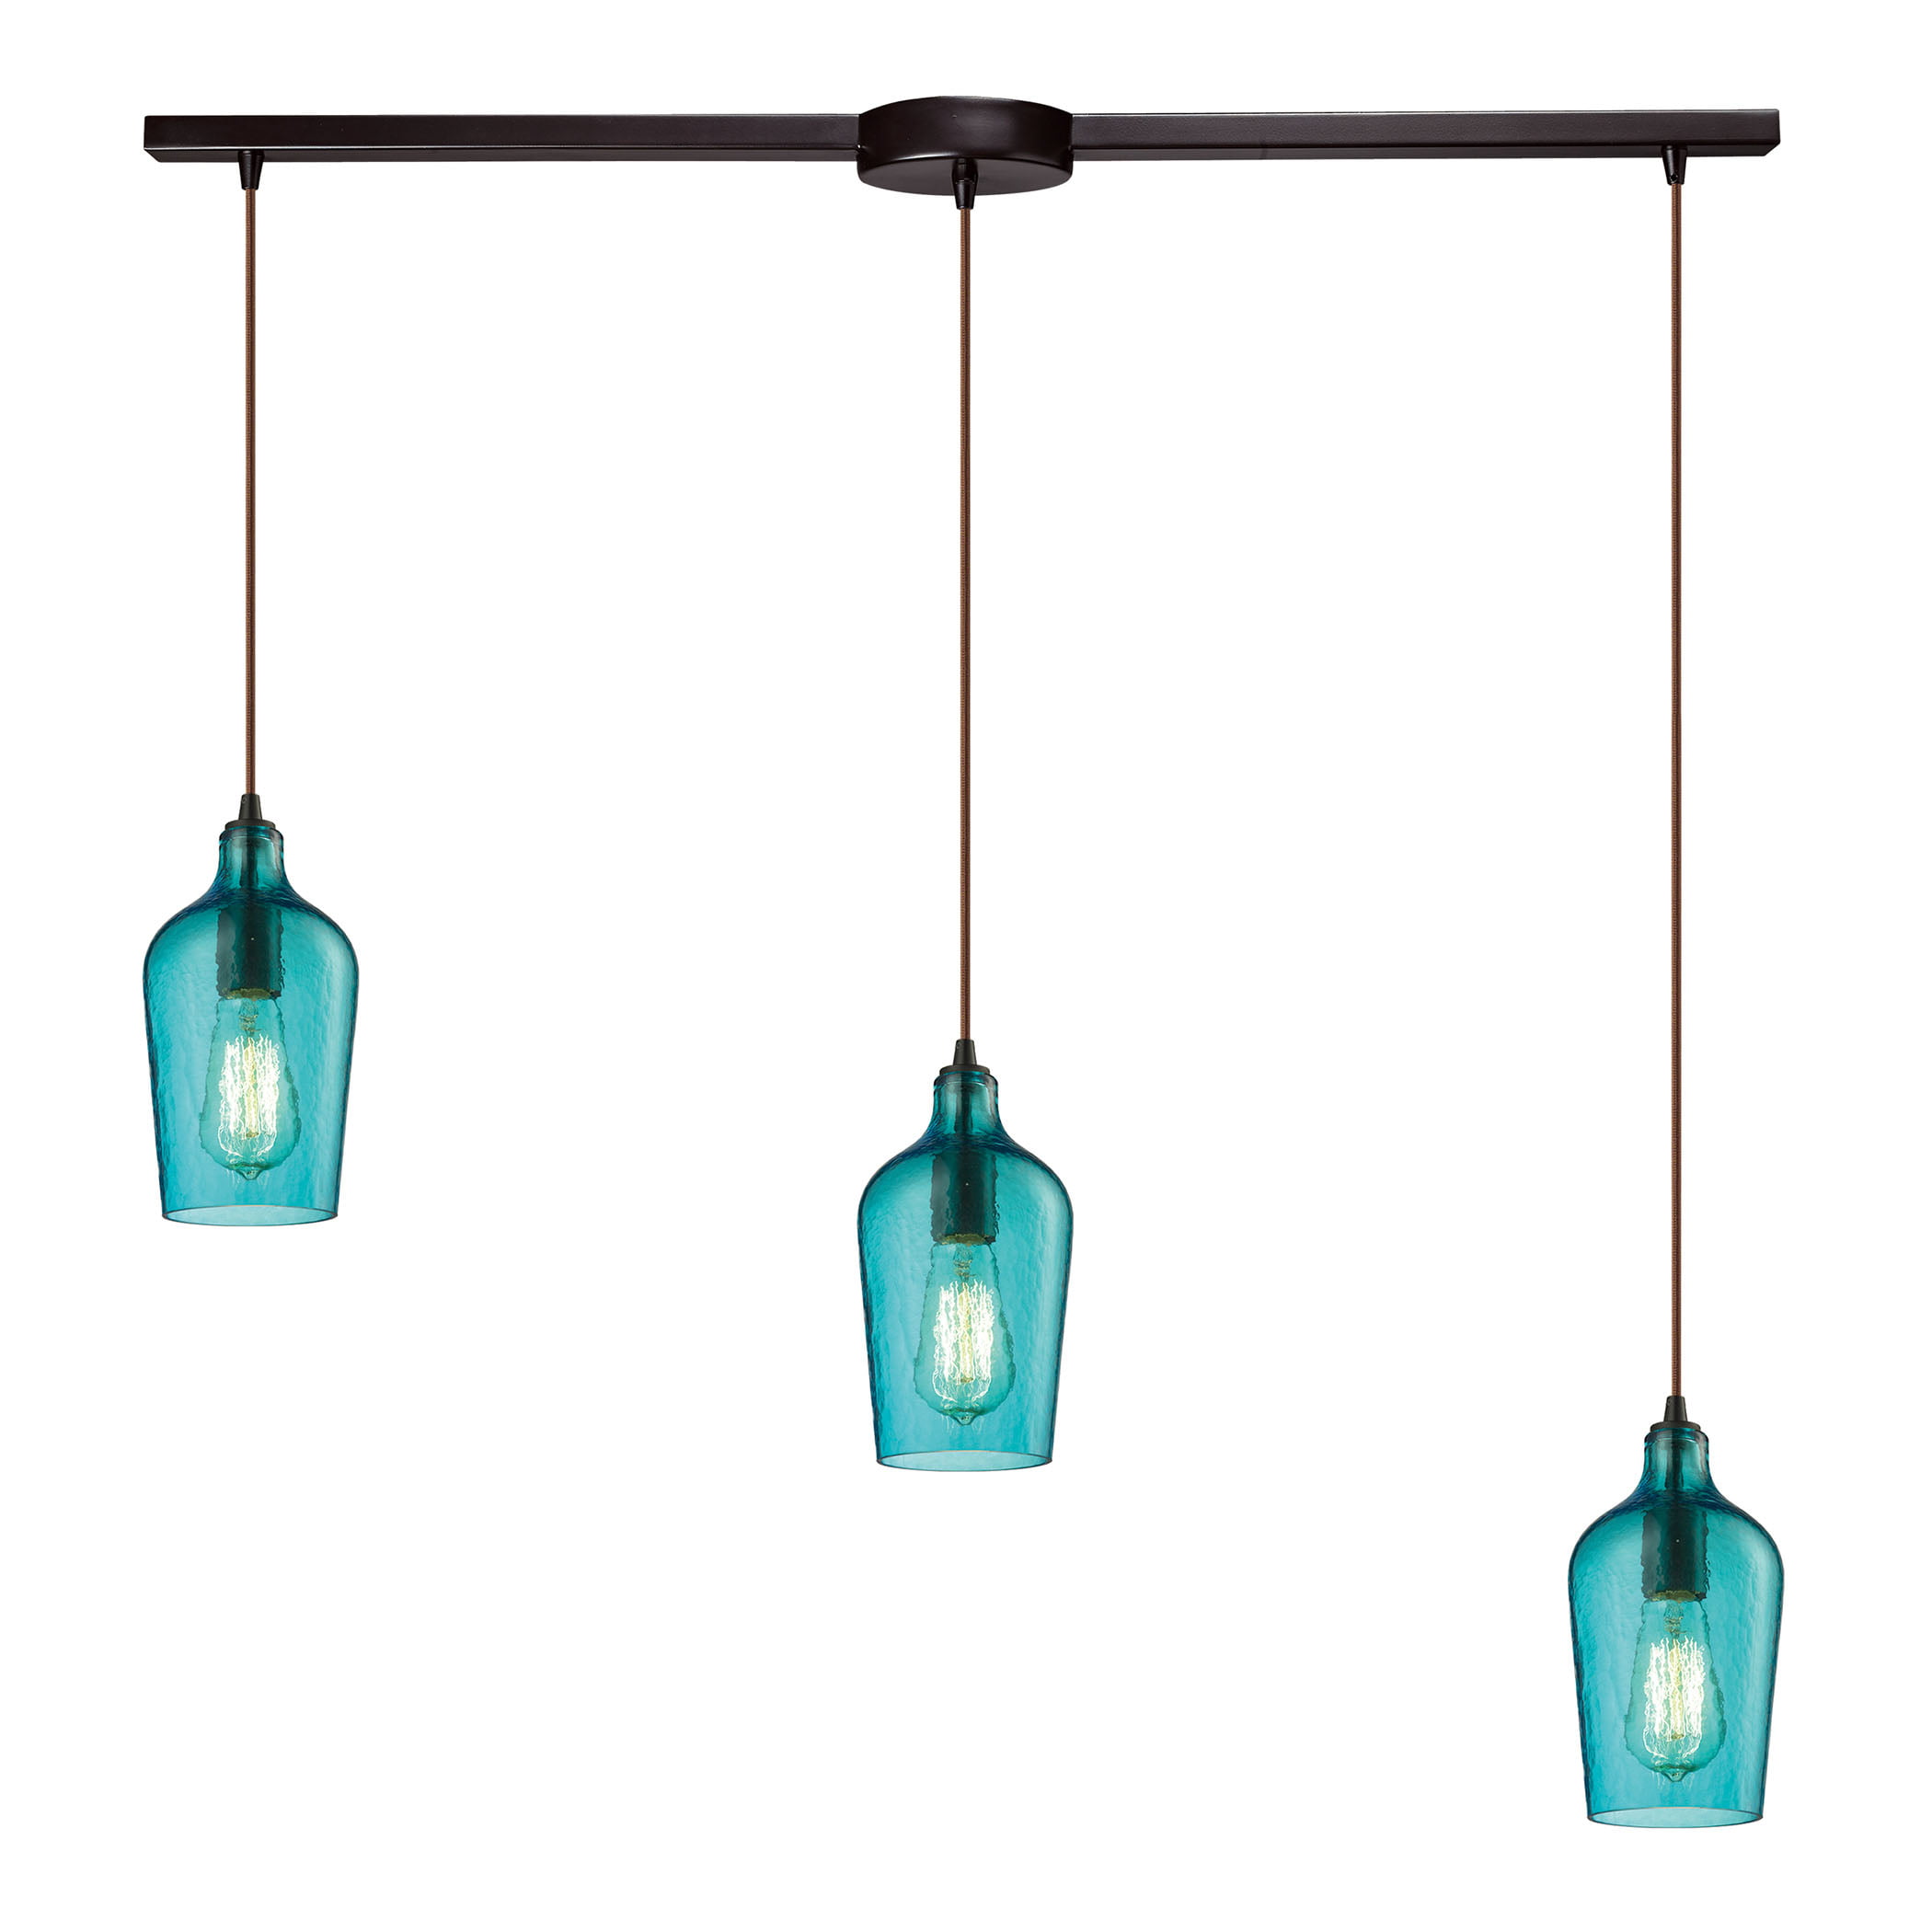 Hammered Glass 3 Light Linear Pendant Fixture In Oiled Bronze With Hammered Aqua Glass Walmart